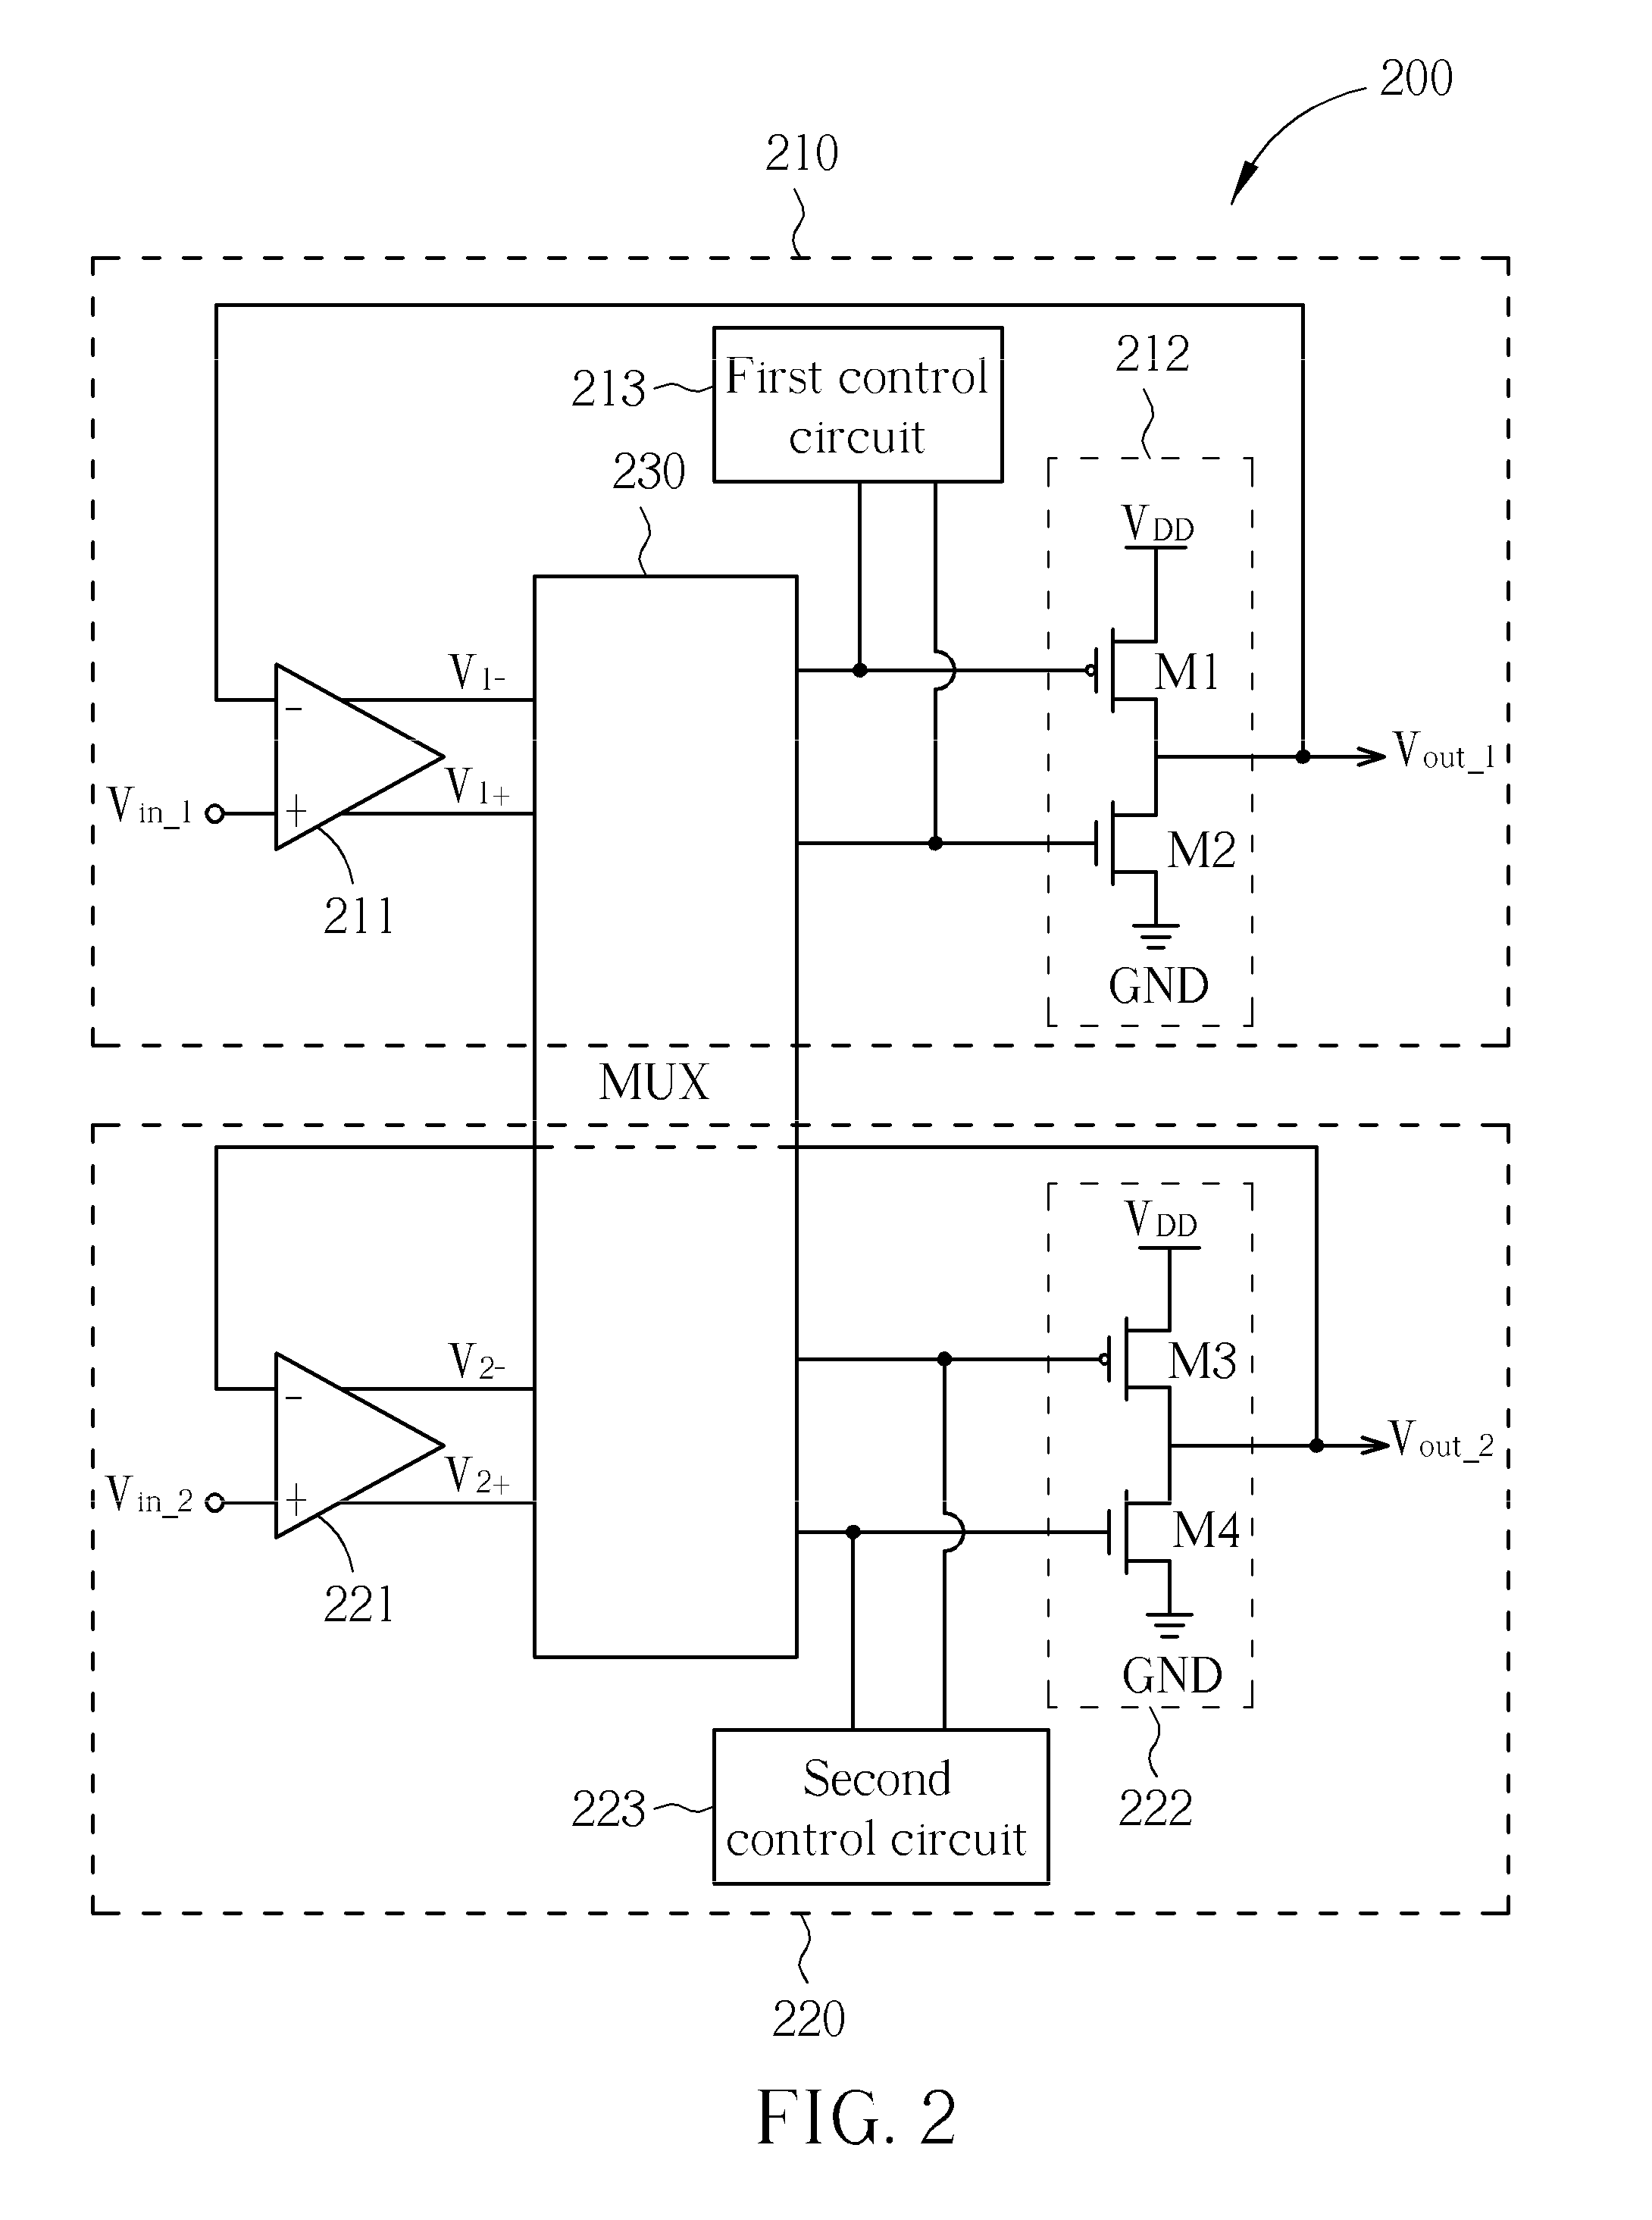 Source driver and associated driving method